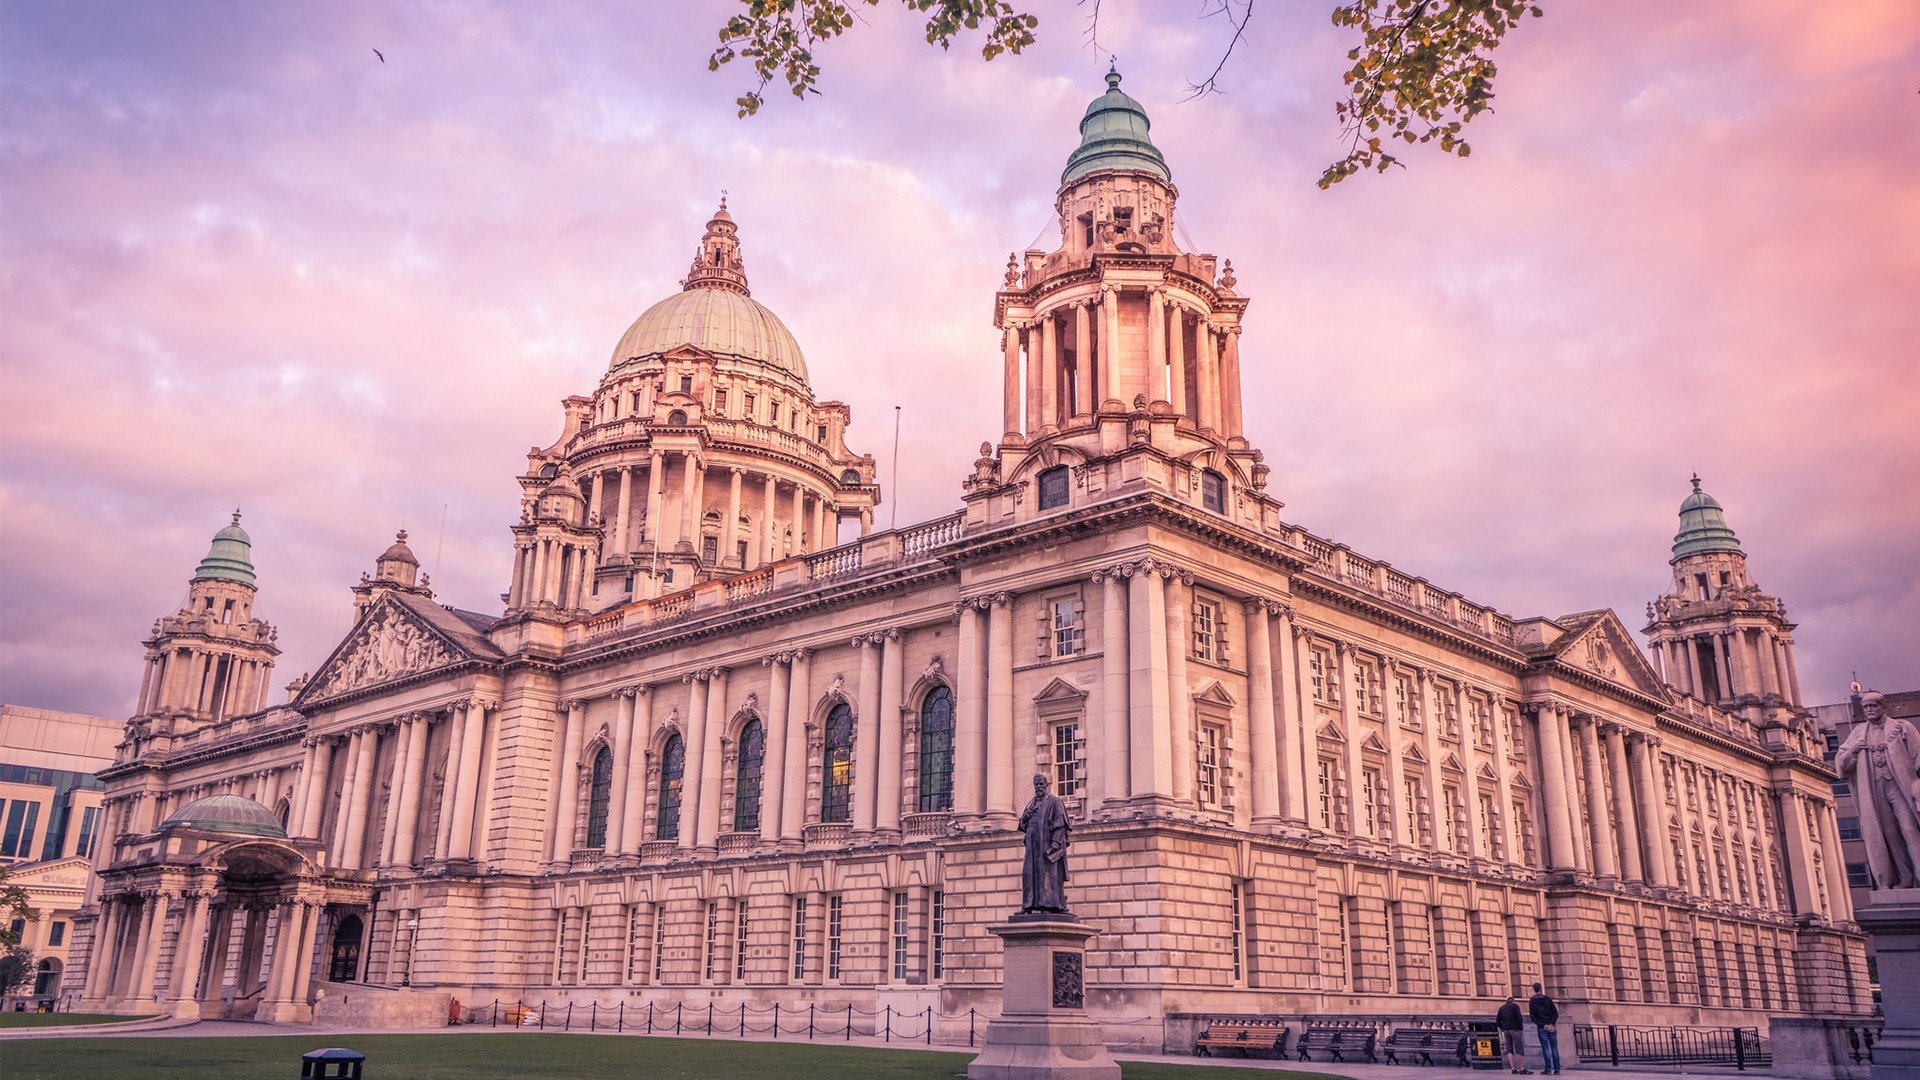 Palace: Belfast City Hall, Donegall Square, Belfast, Northern Ireland. 1920x1080 Full HD Wallpaper.